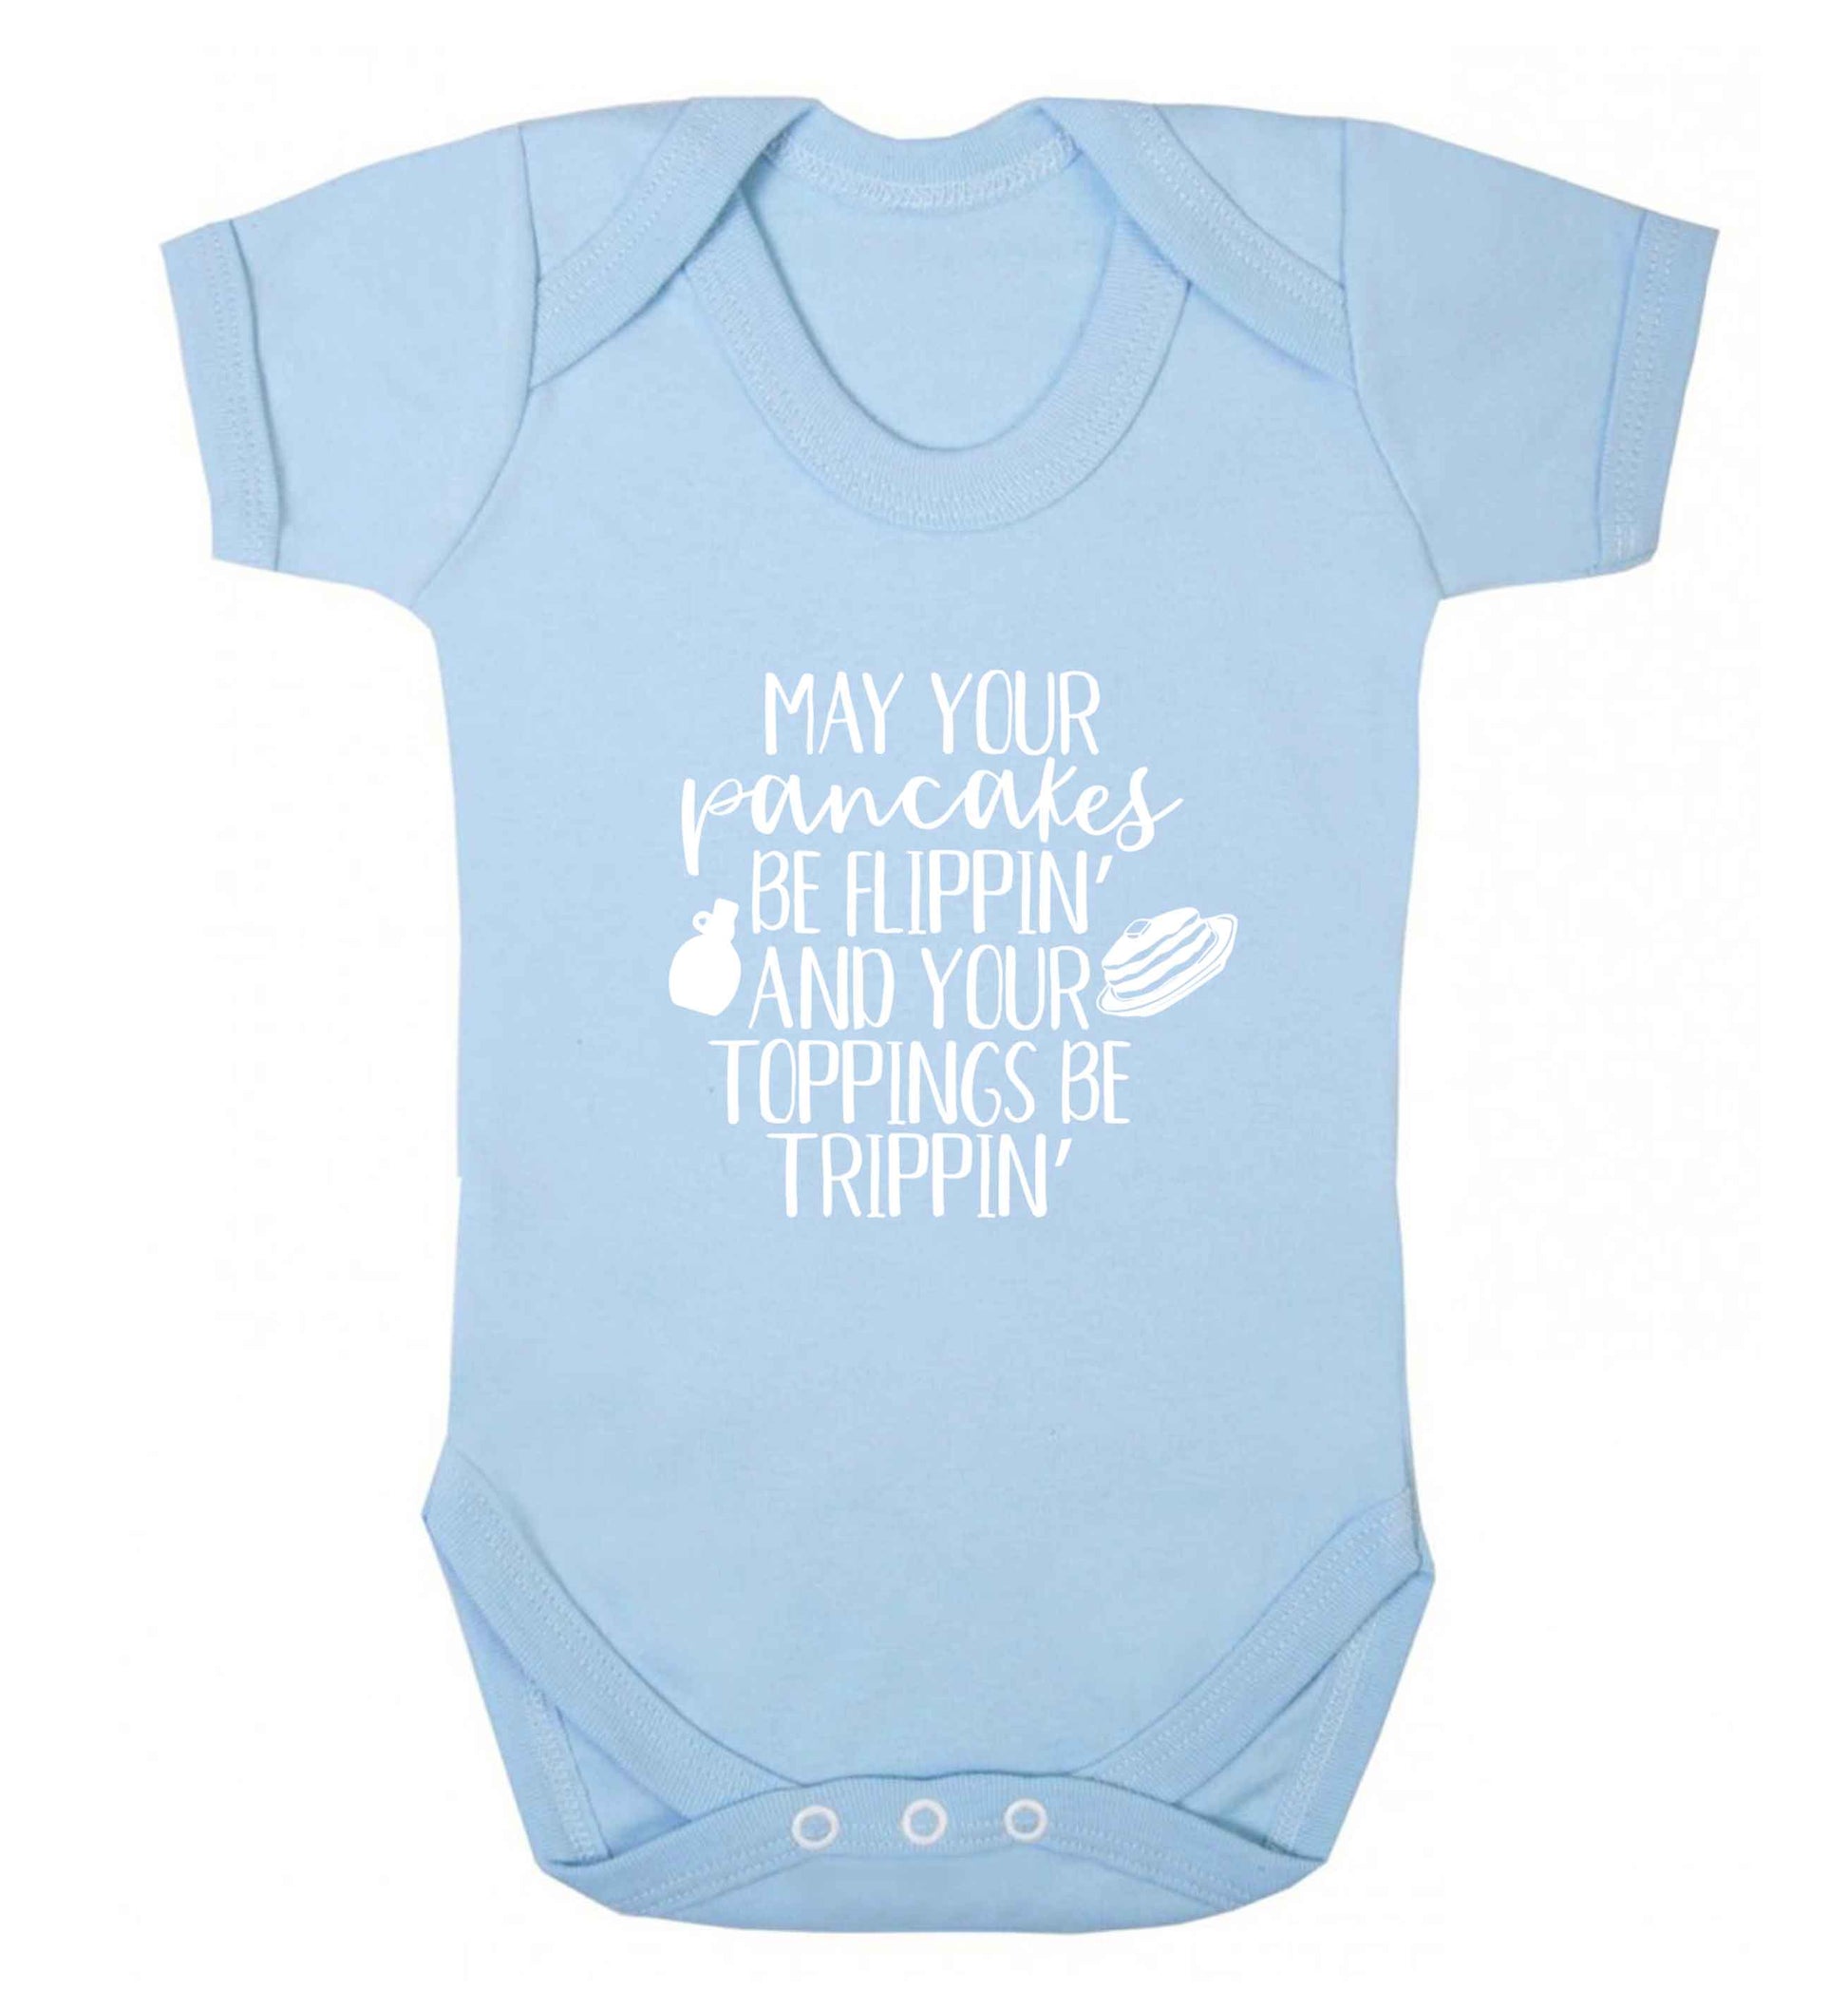 May your pancakes be flippin' and your toppings be trippin' baby vest pale blue 18-24 months